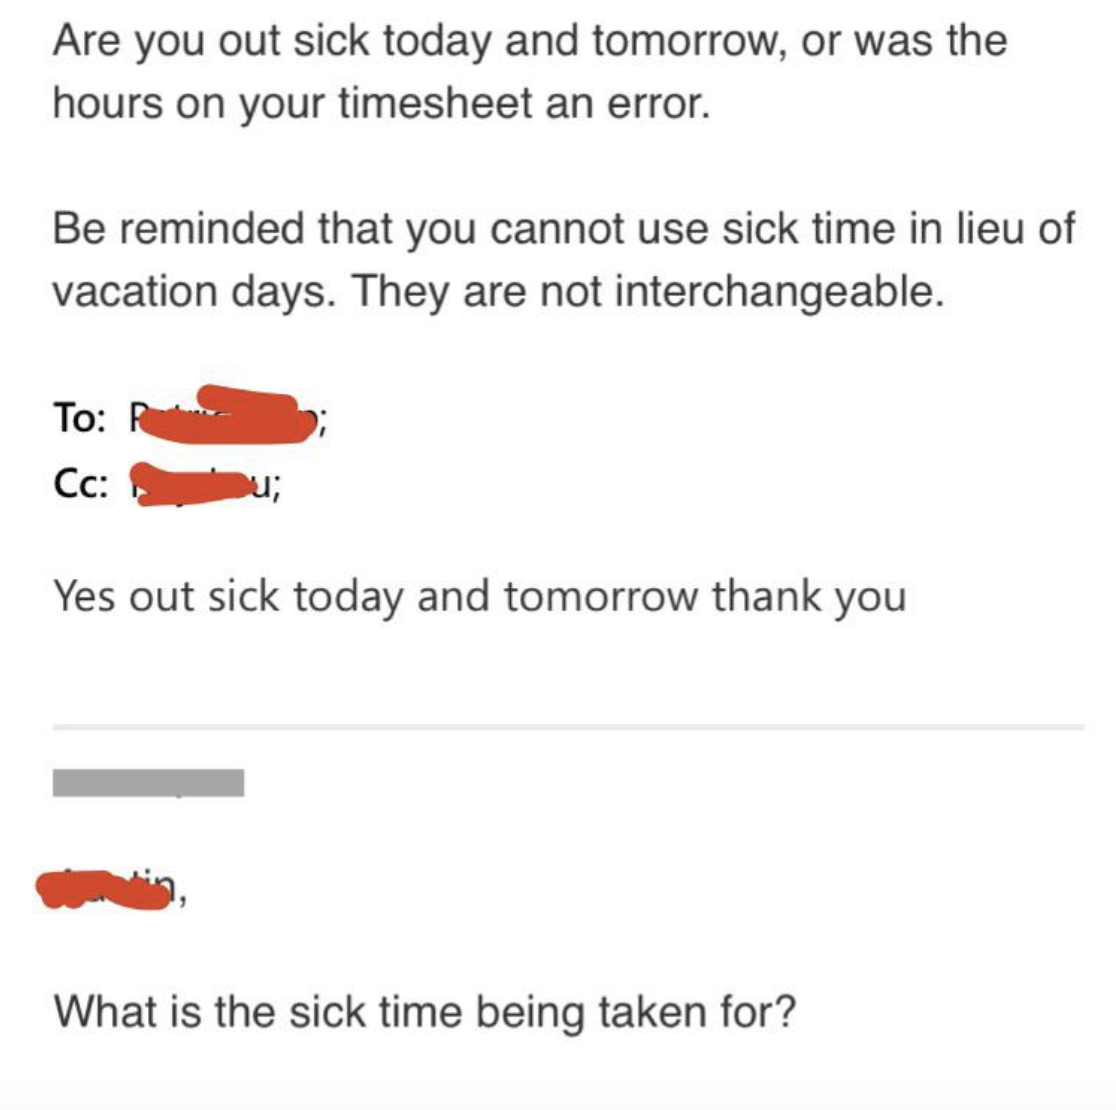 boss asking what the sick time is being taken for